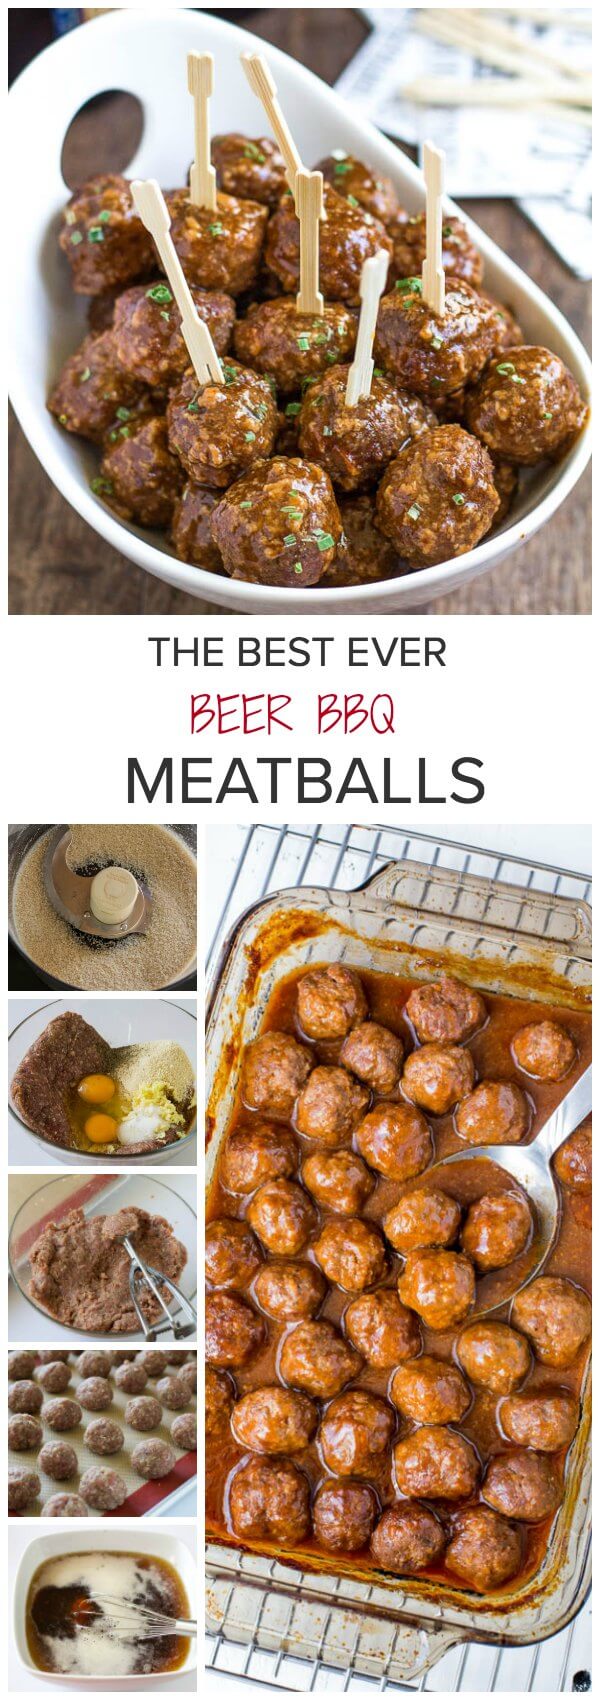 Ditch that grape jelly cocktail meatball recipe. And spoil your guests with beer BBQ meatballs instead! Juicy tender meatballs in smoky, rich and slightly sweet beer bbq sauce. The BEST!